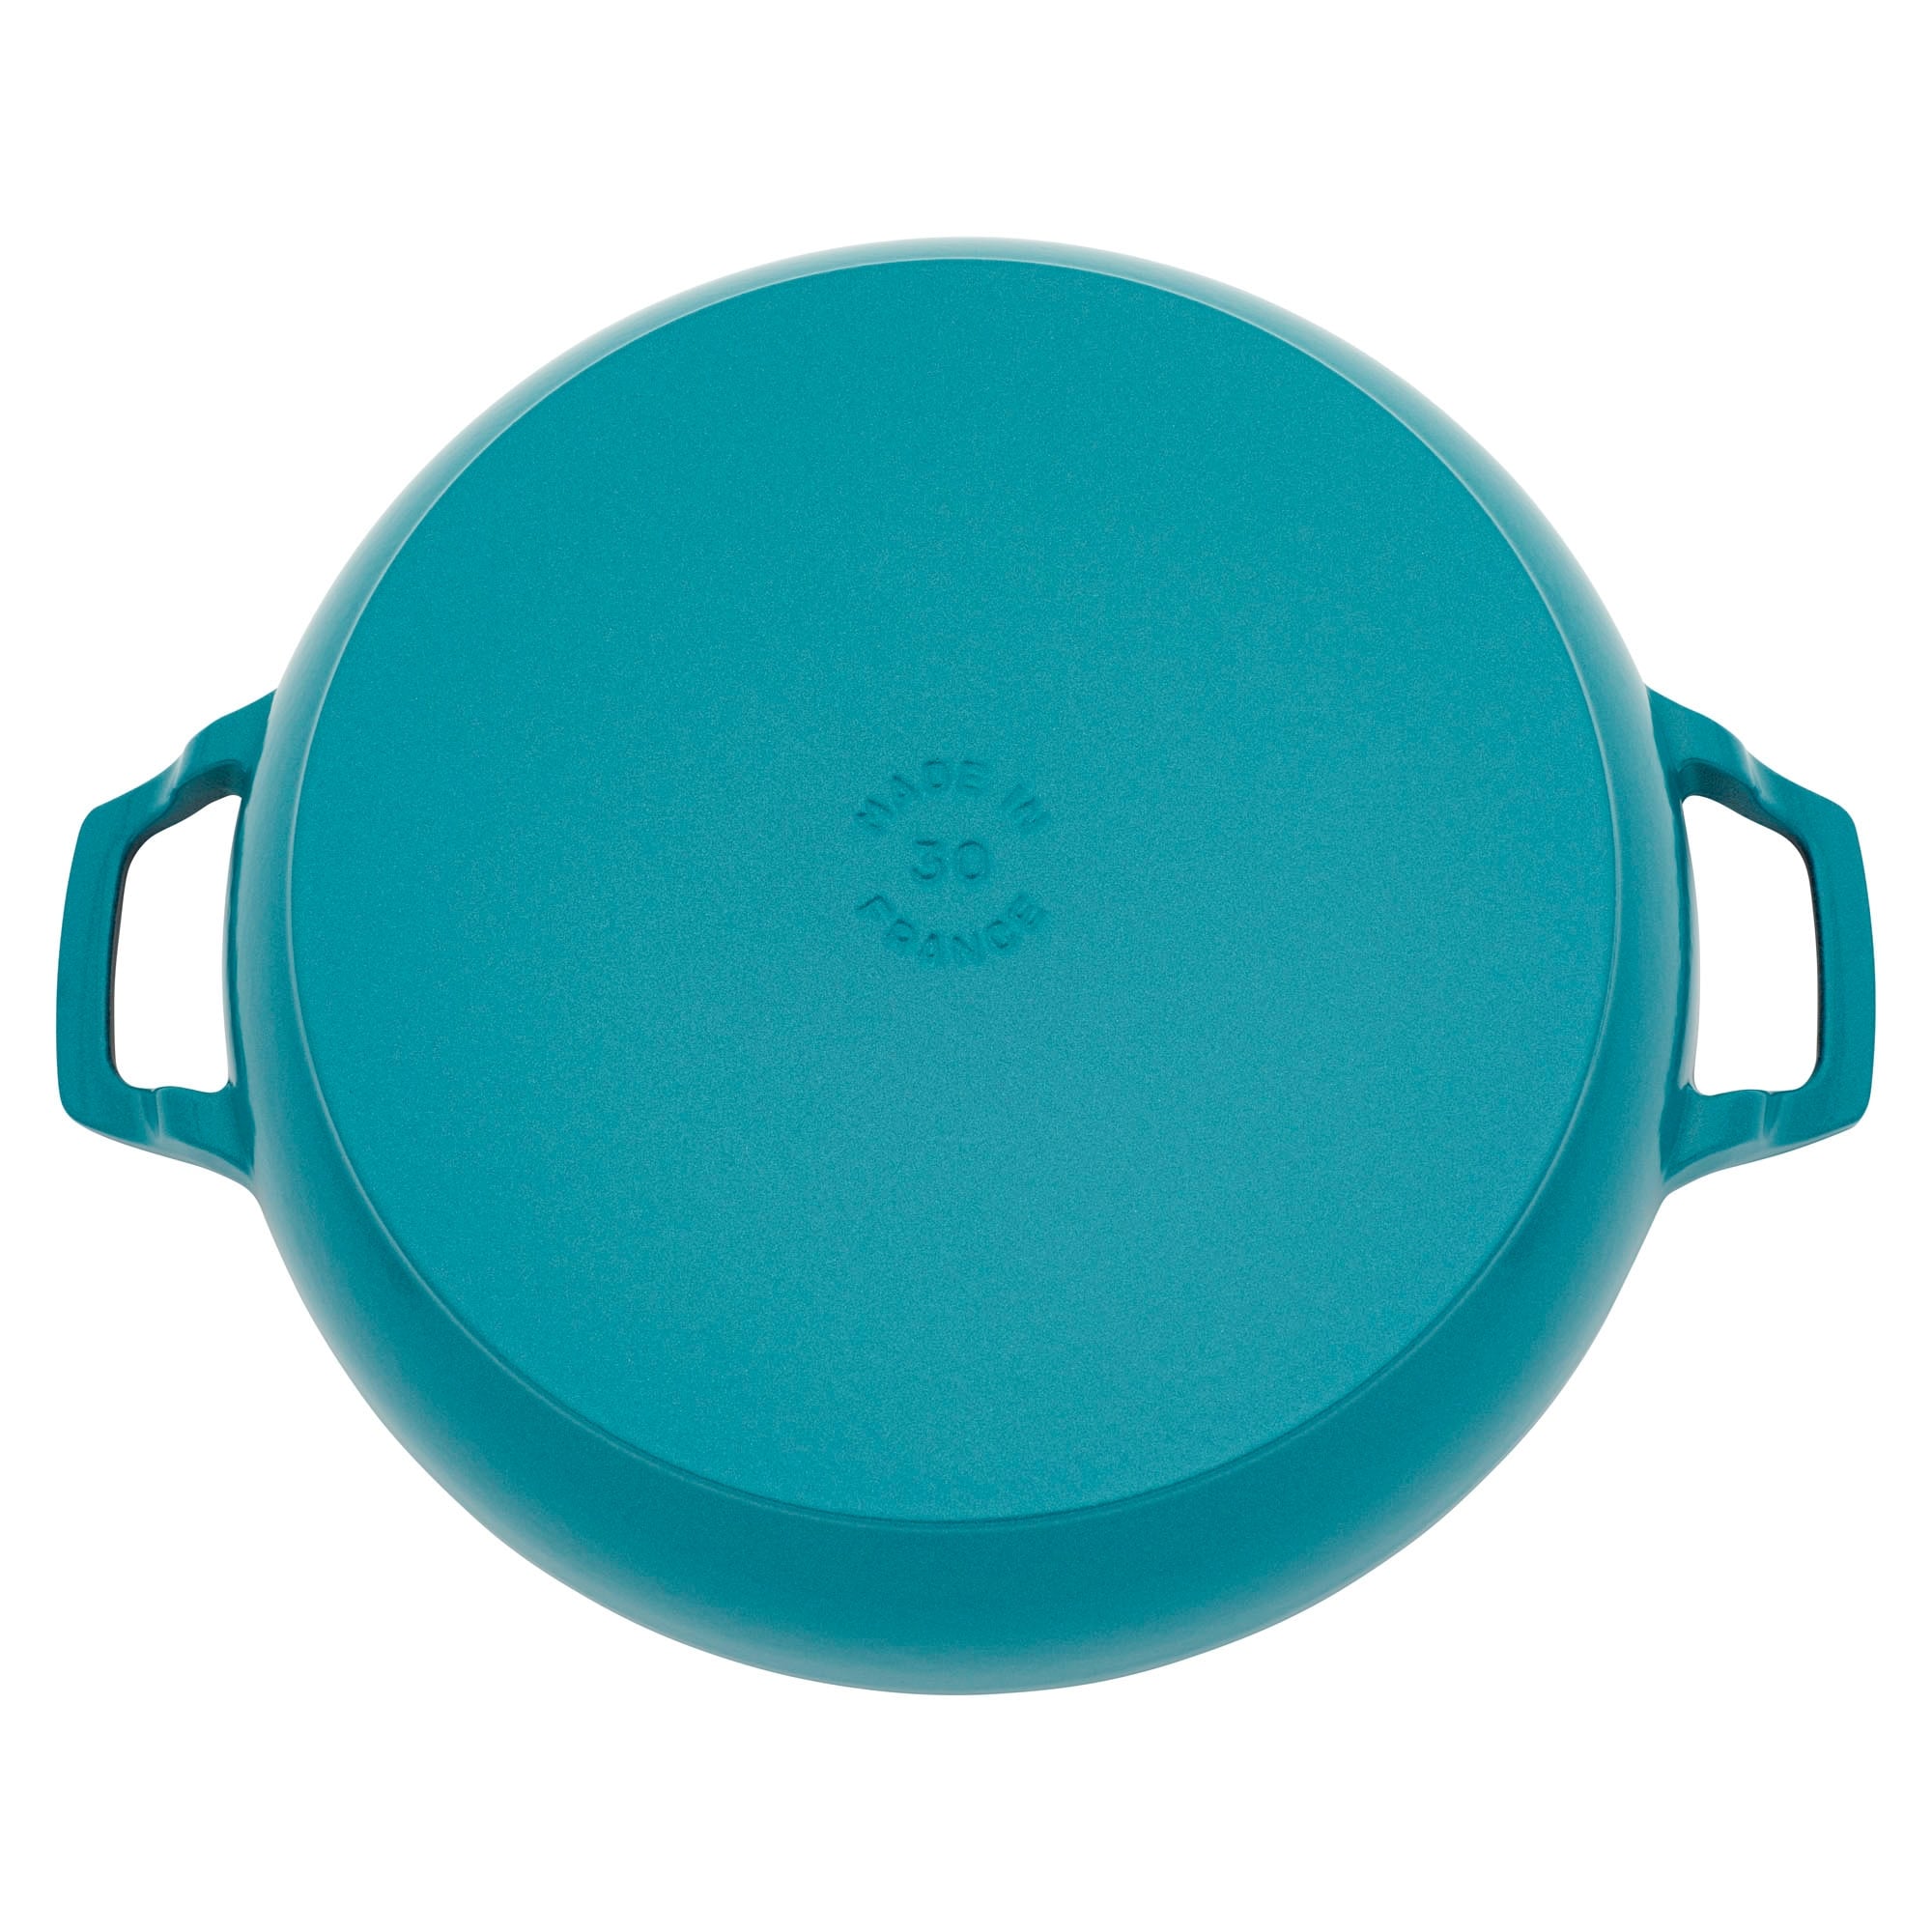 https://ak1.ostkcdn.com/images/products/is/images/direct/a70b276a279401c1f52504f82a2eb7d5897d218d/STAUB-Cast-Iron-3.5-qt-Braiser-with-Glass-Lid.jpg